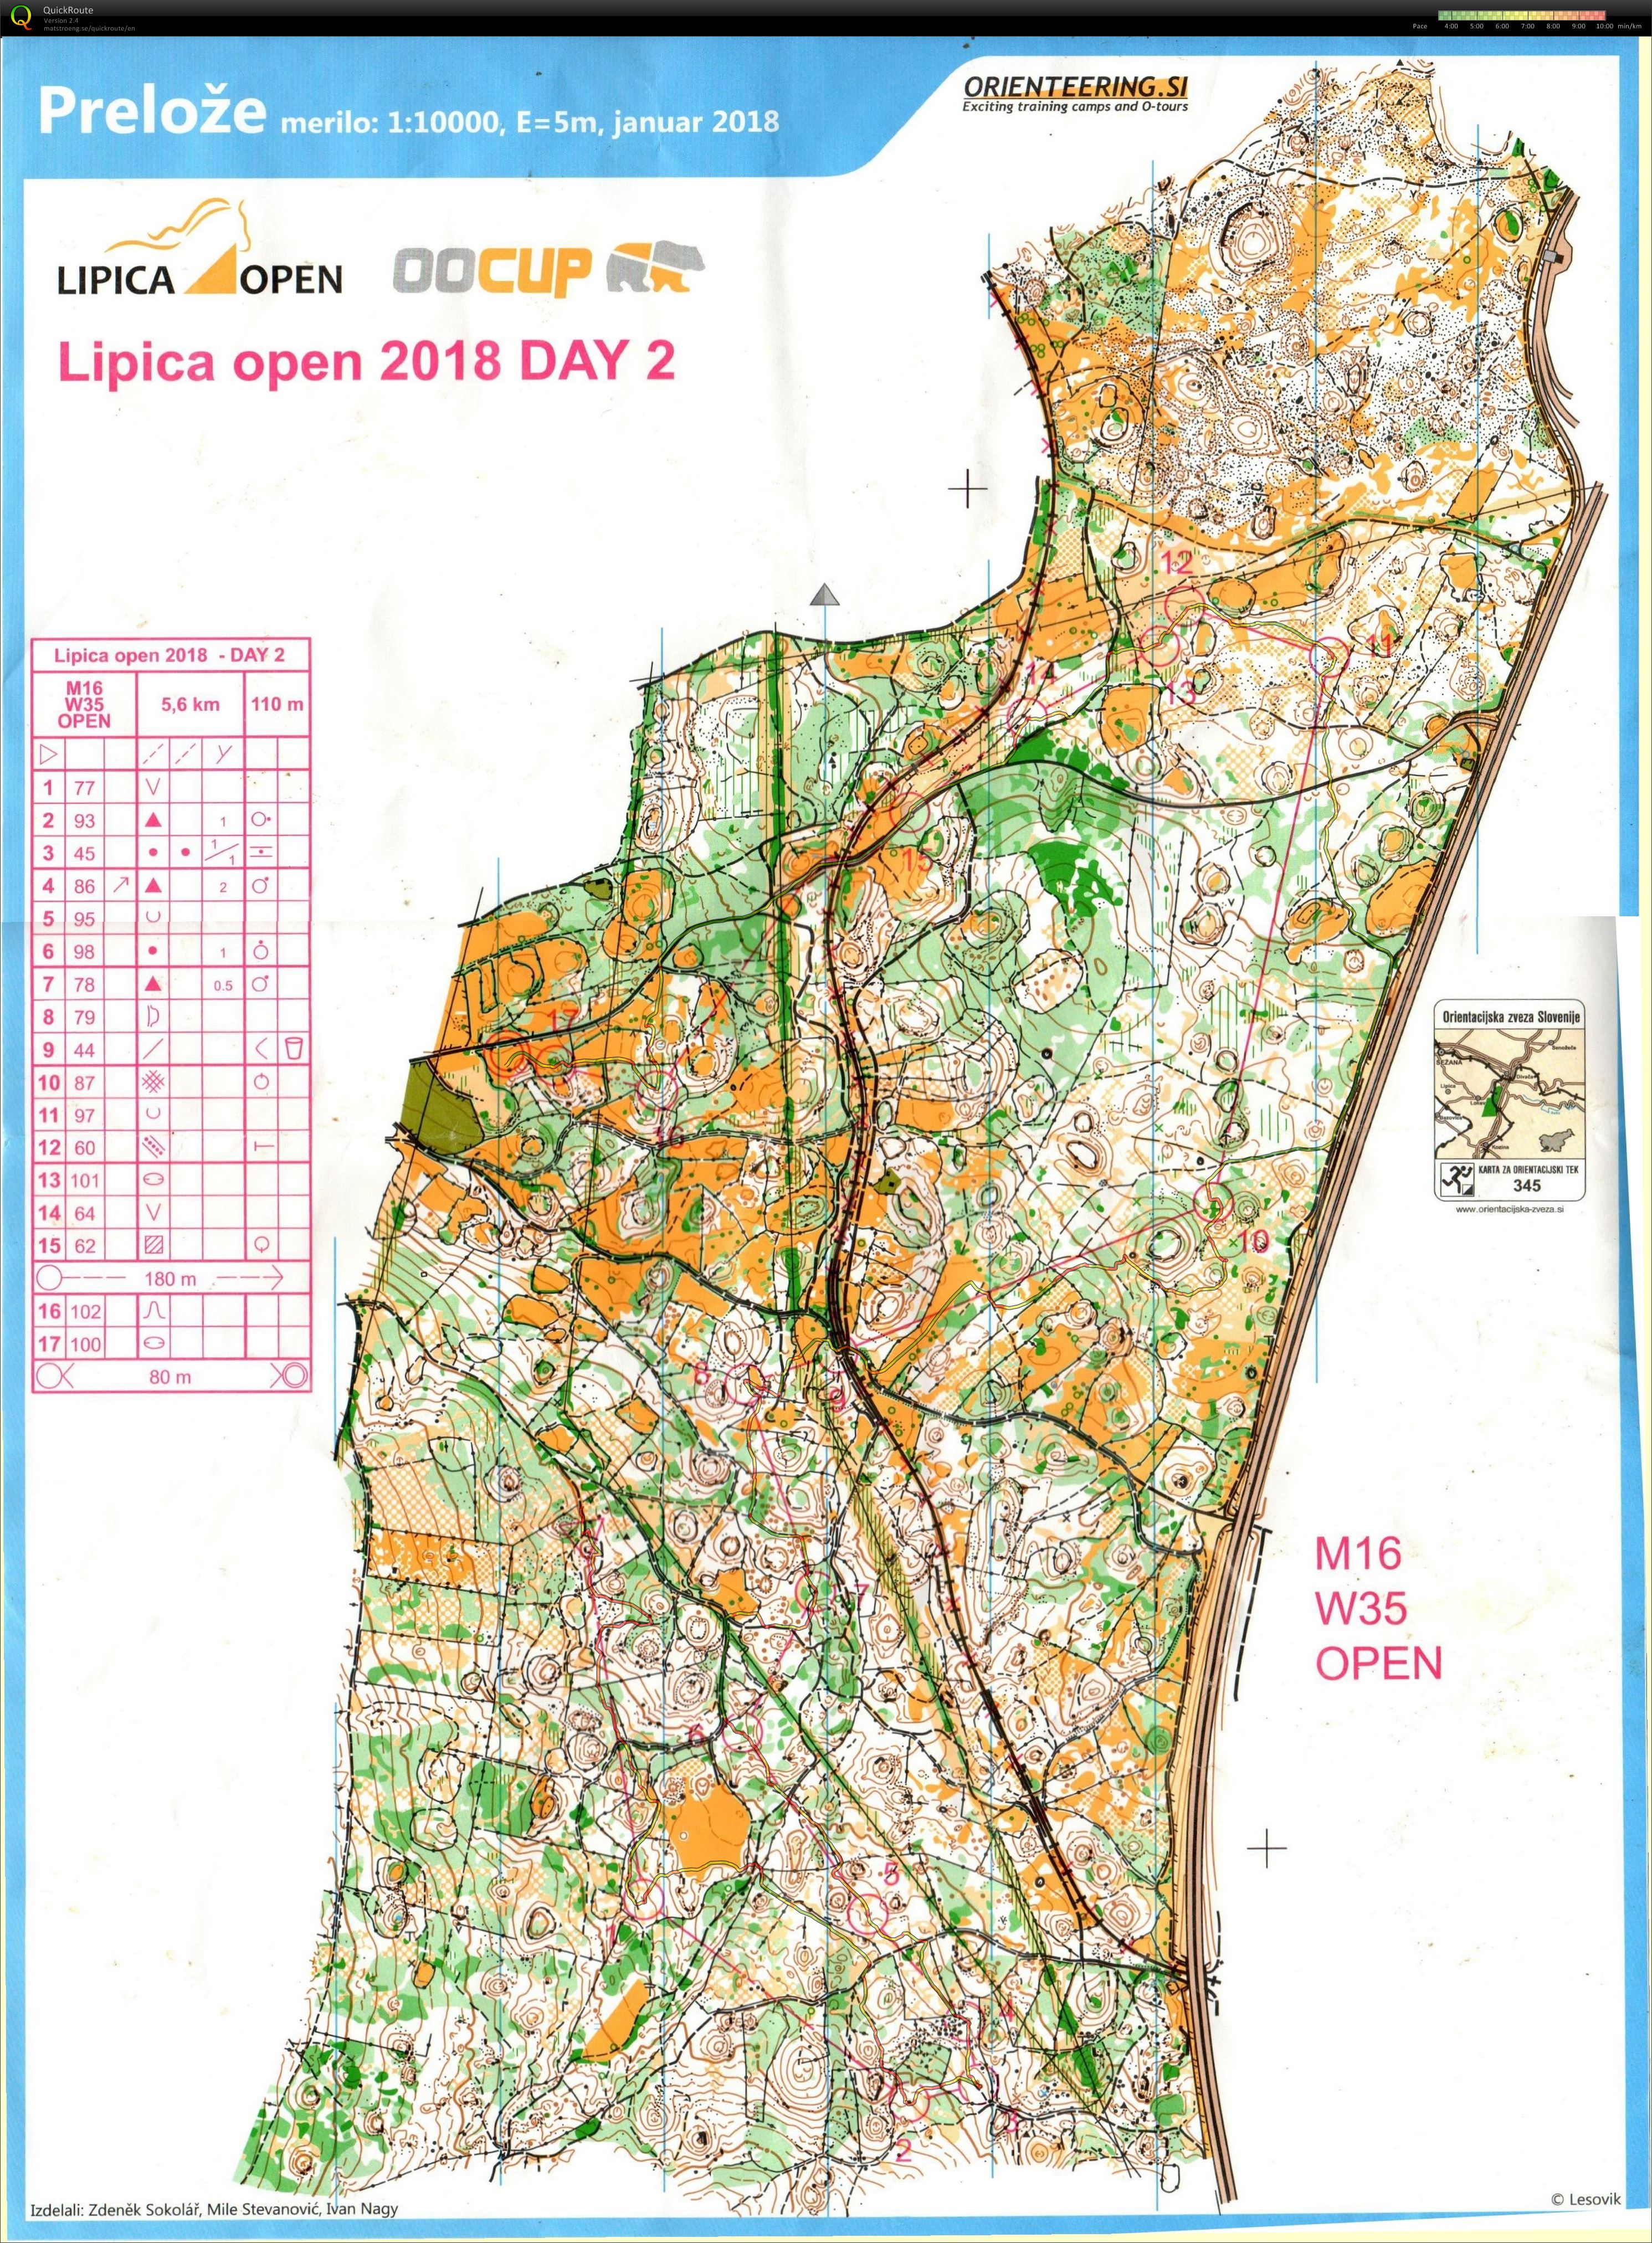 Lipica Open 2018 Day 2 (11.03.2018)